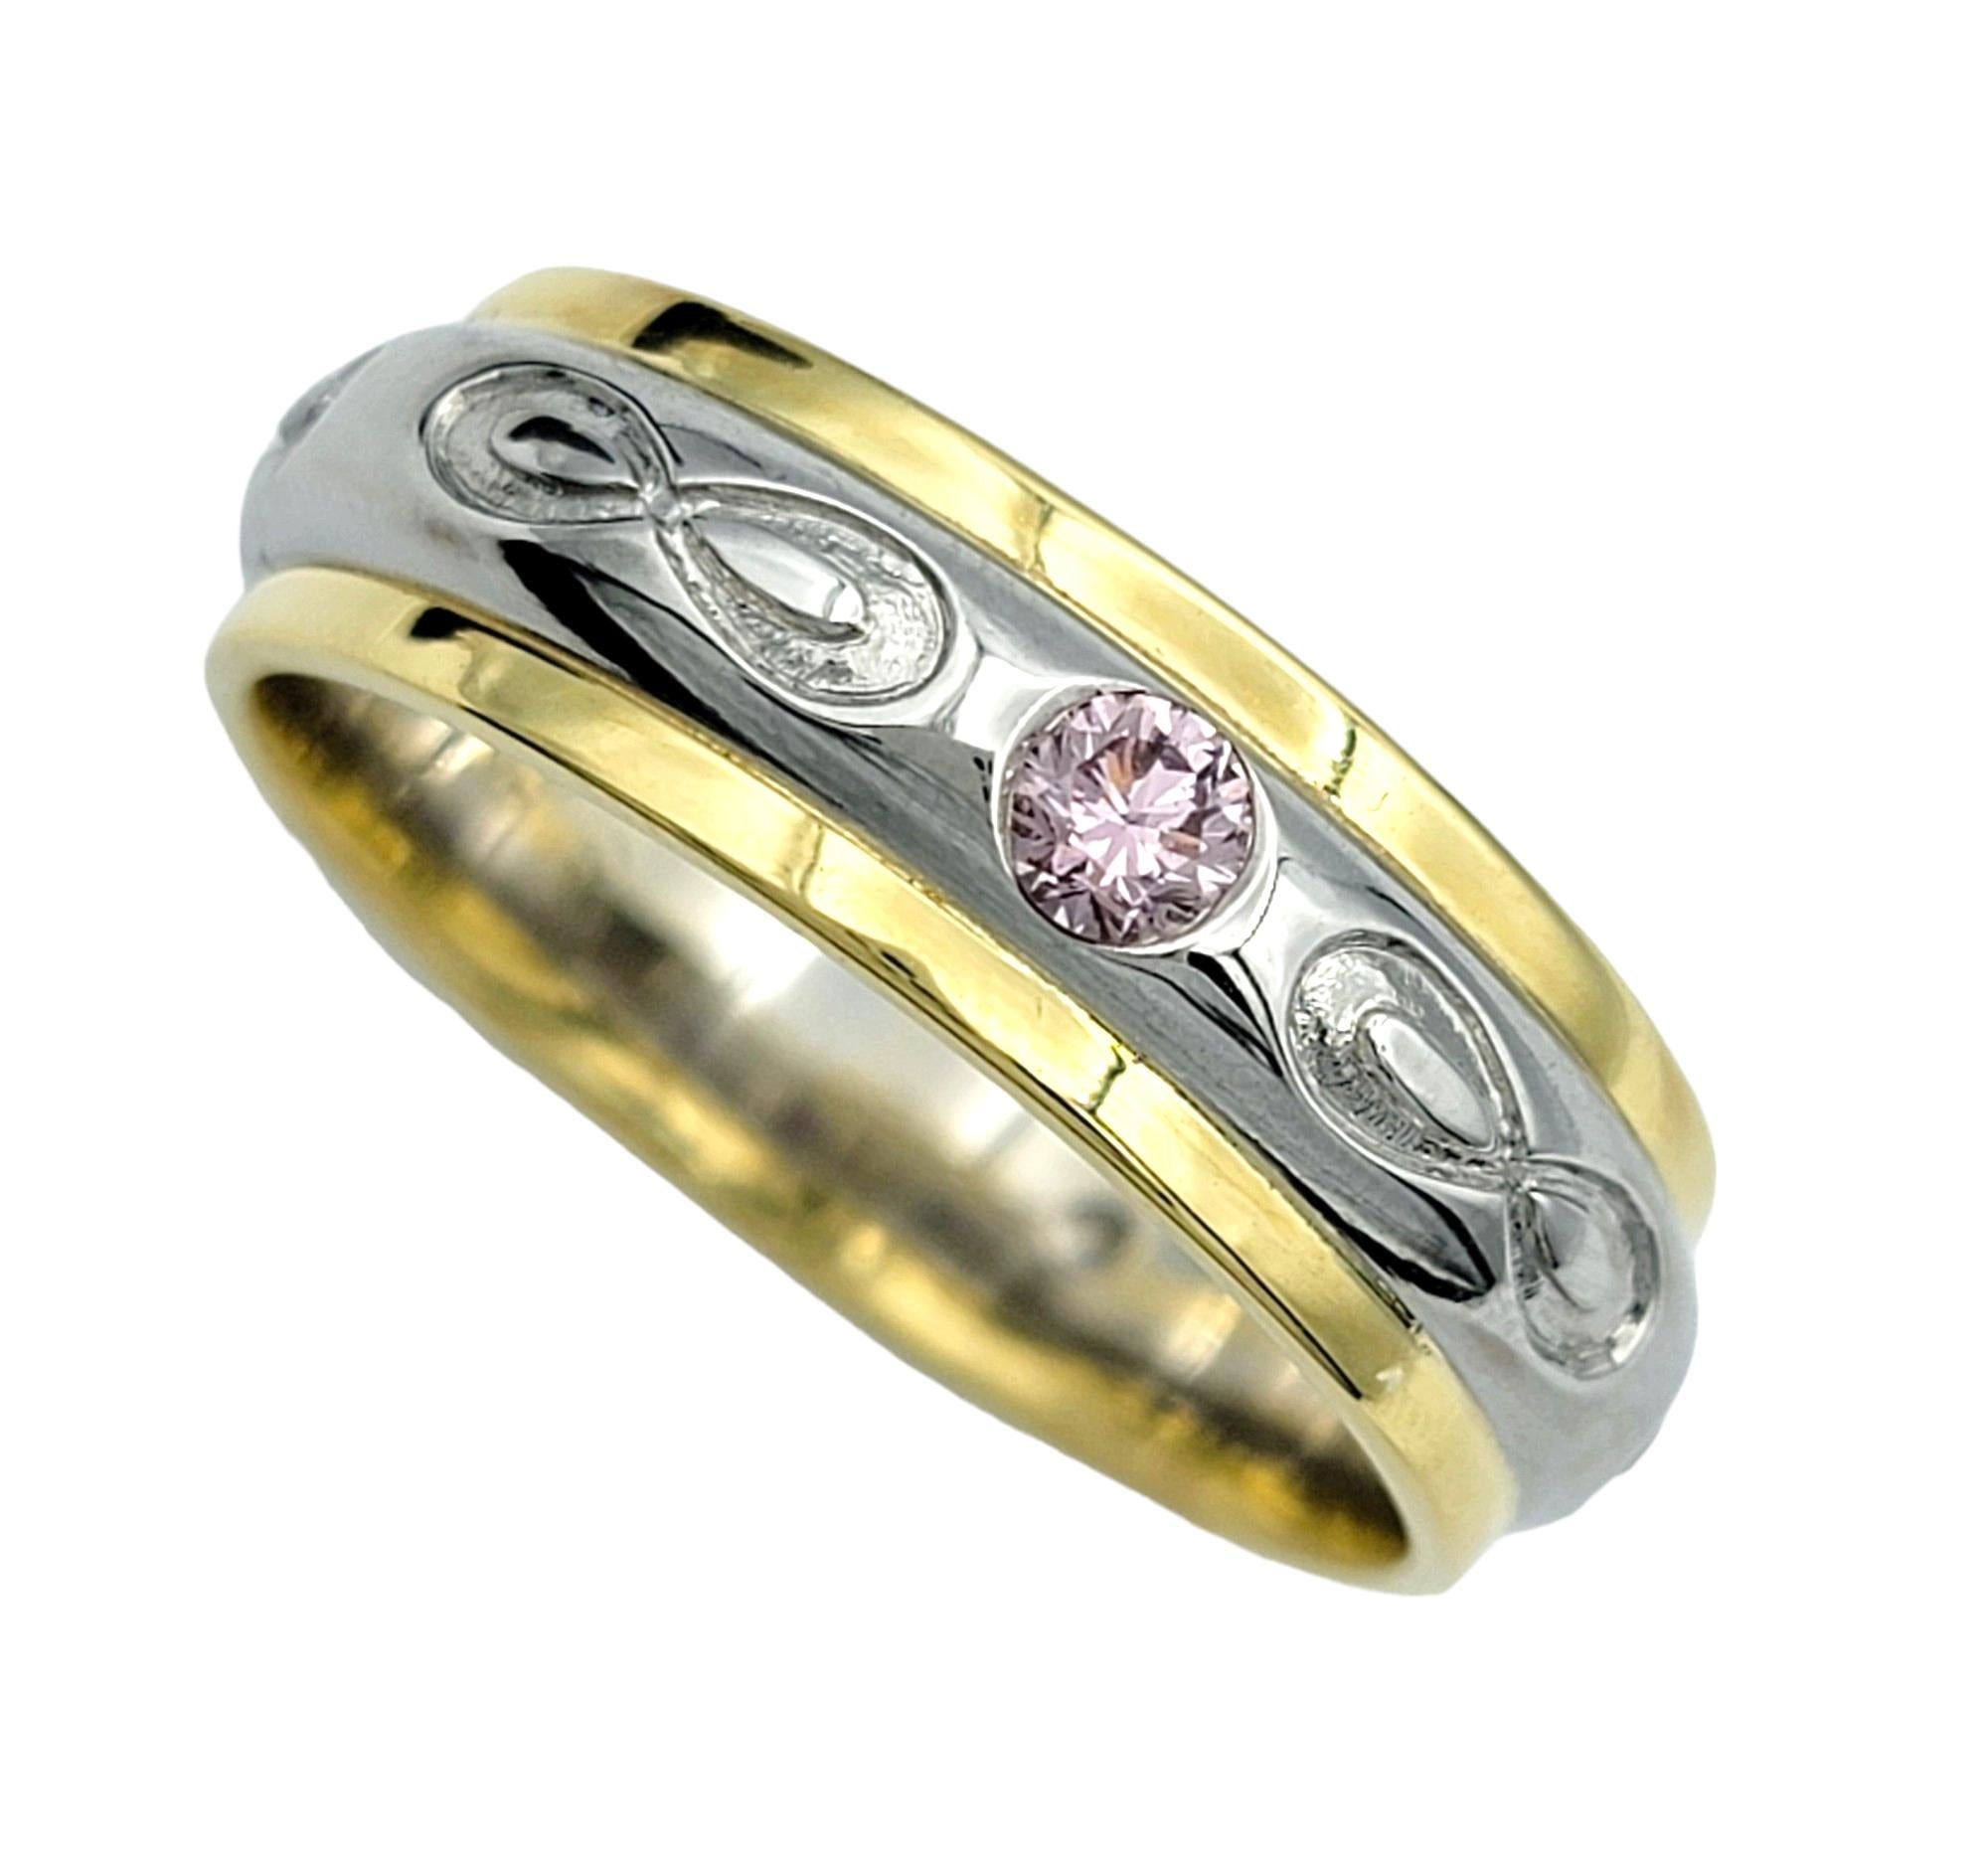 Ring Size: 10.75

This stunning band ring was beautifully crafted in 18 karat yellow gold and platinum, the combination of metals adds a luxurious touch to the design while ensuring durability and longevity. At the heart of the ring lies a single